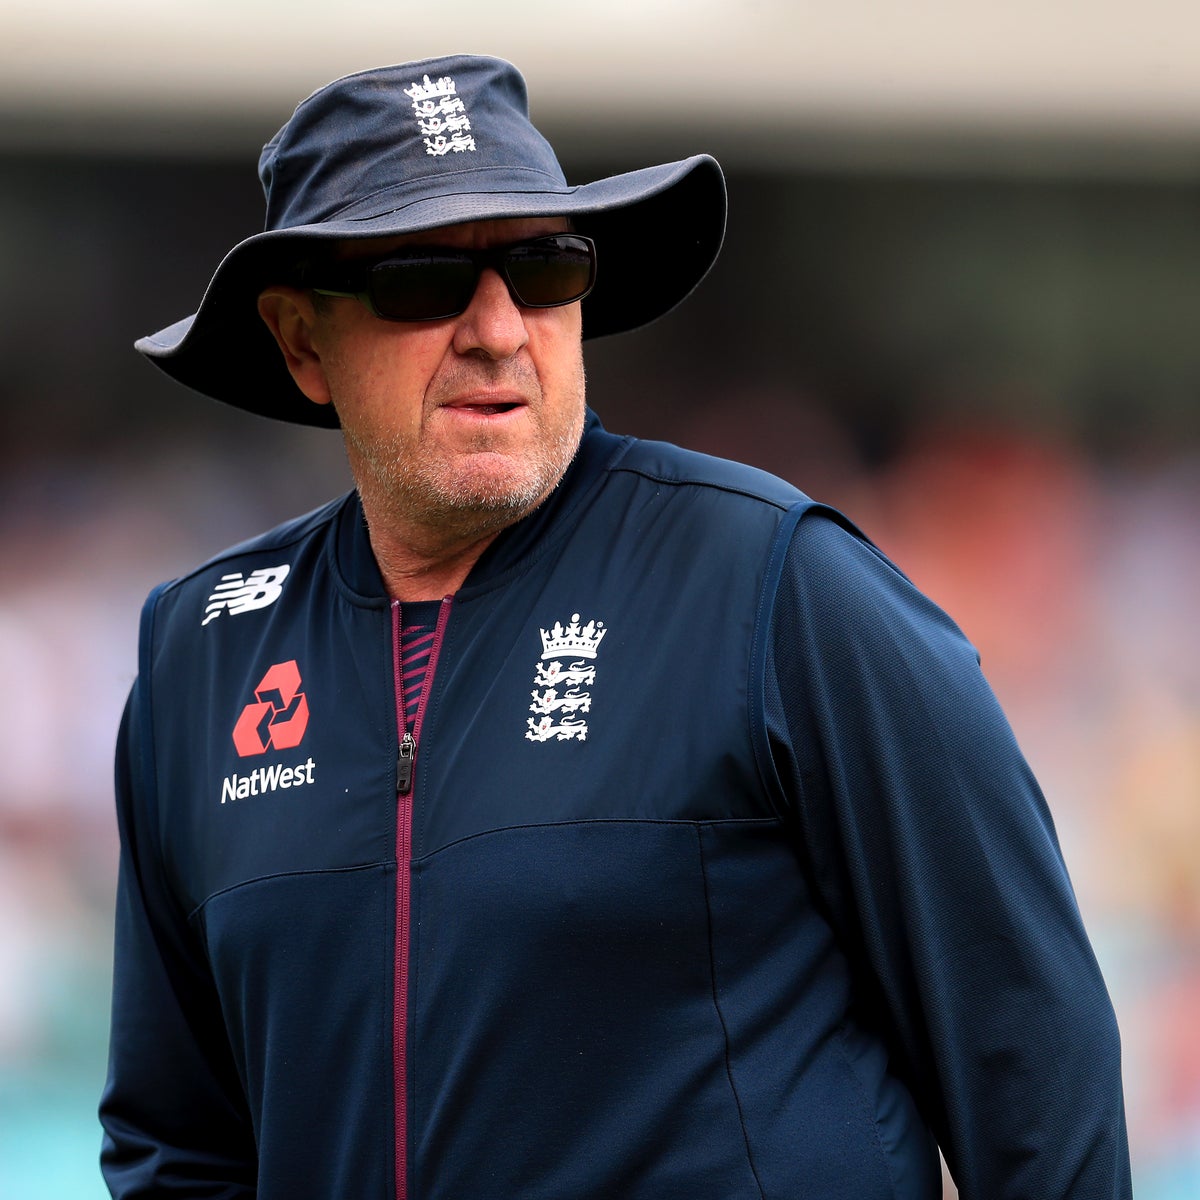 On this day in 2015: Trevor Bayliss appointed England head coach